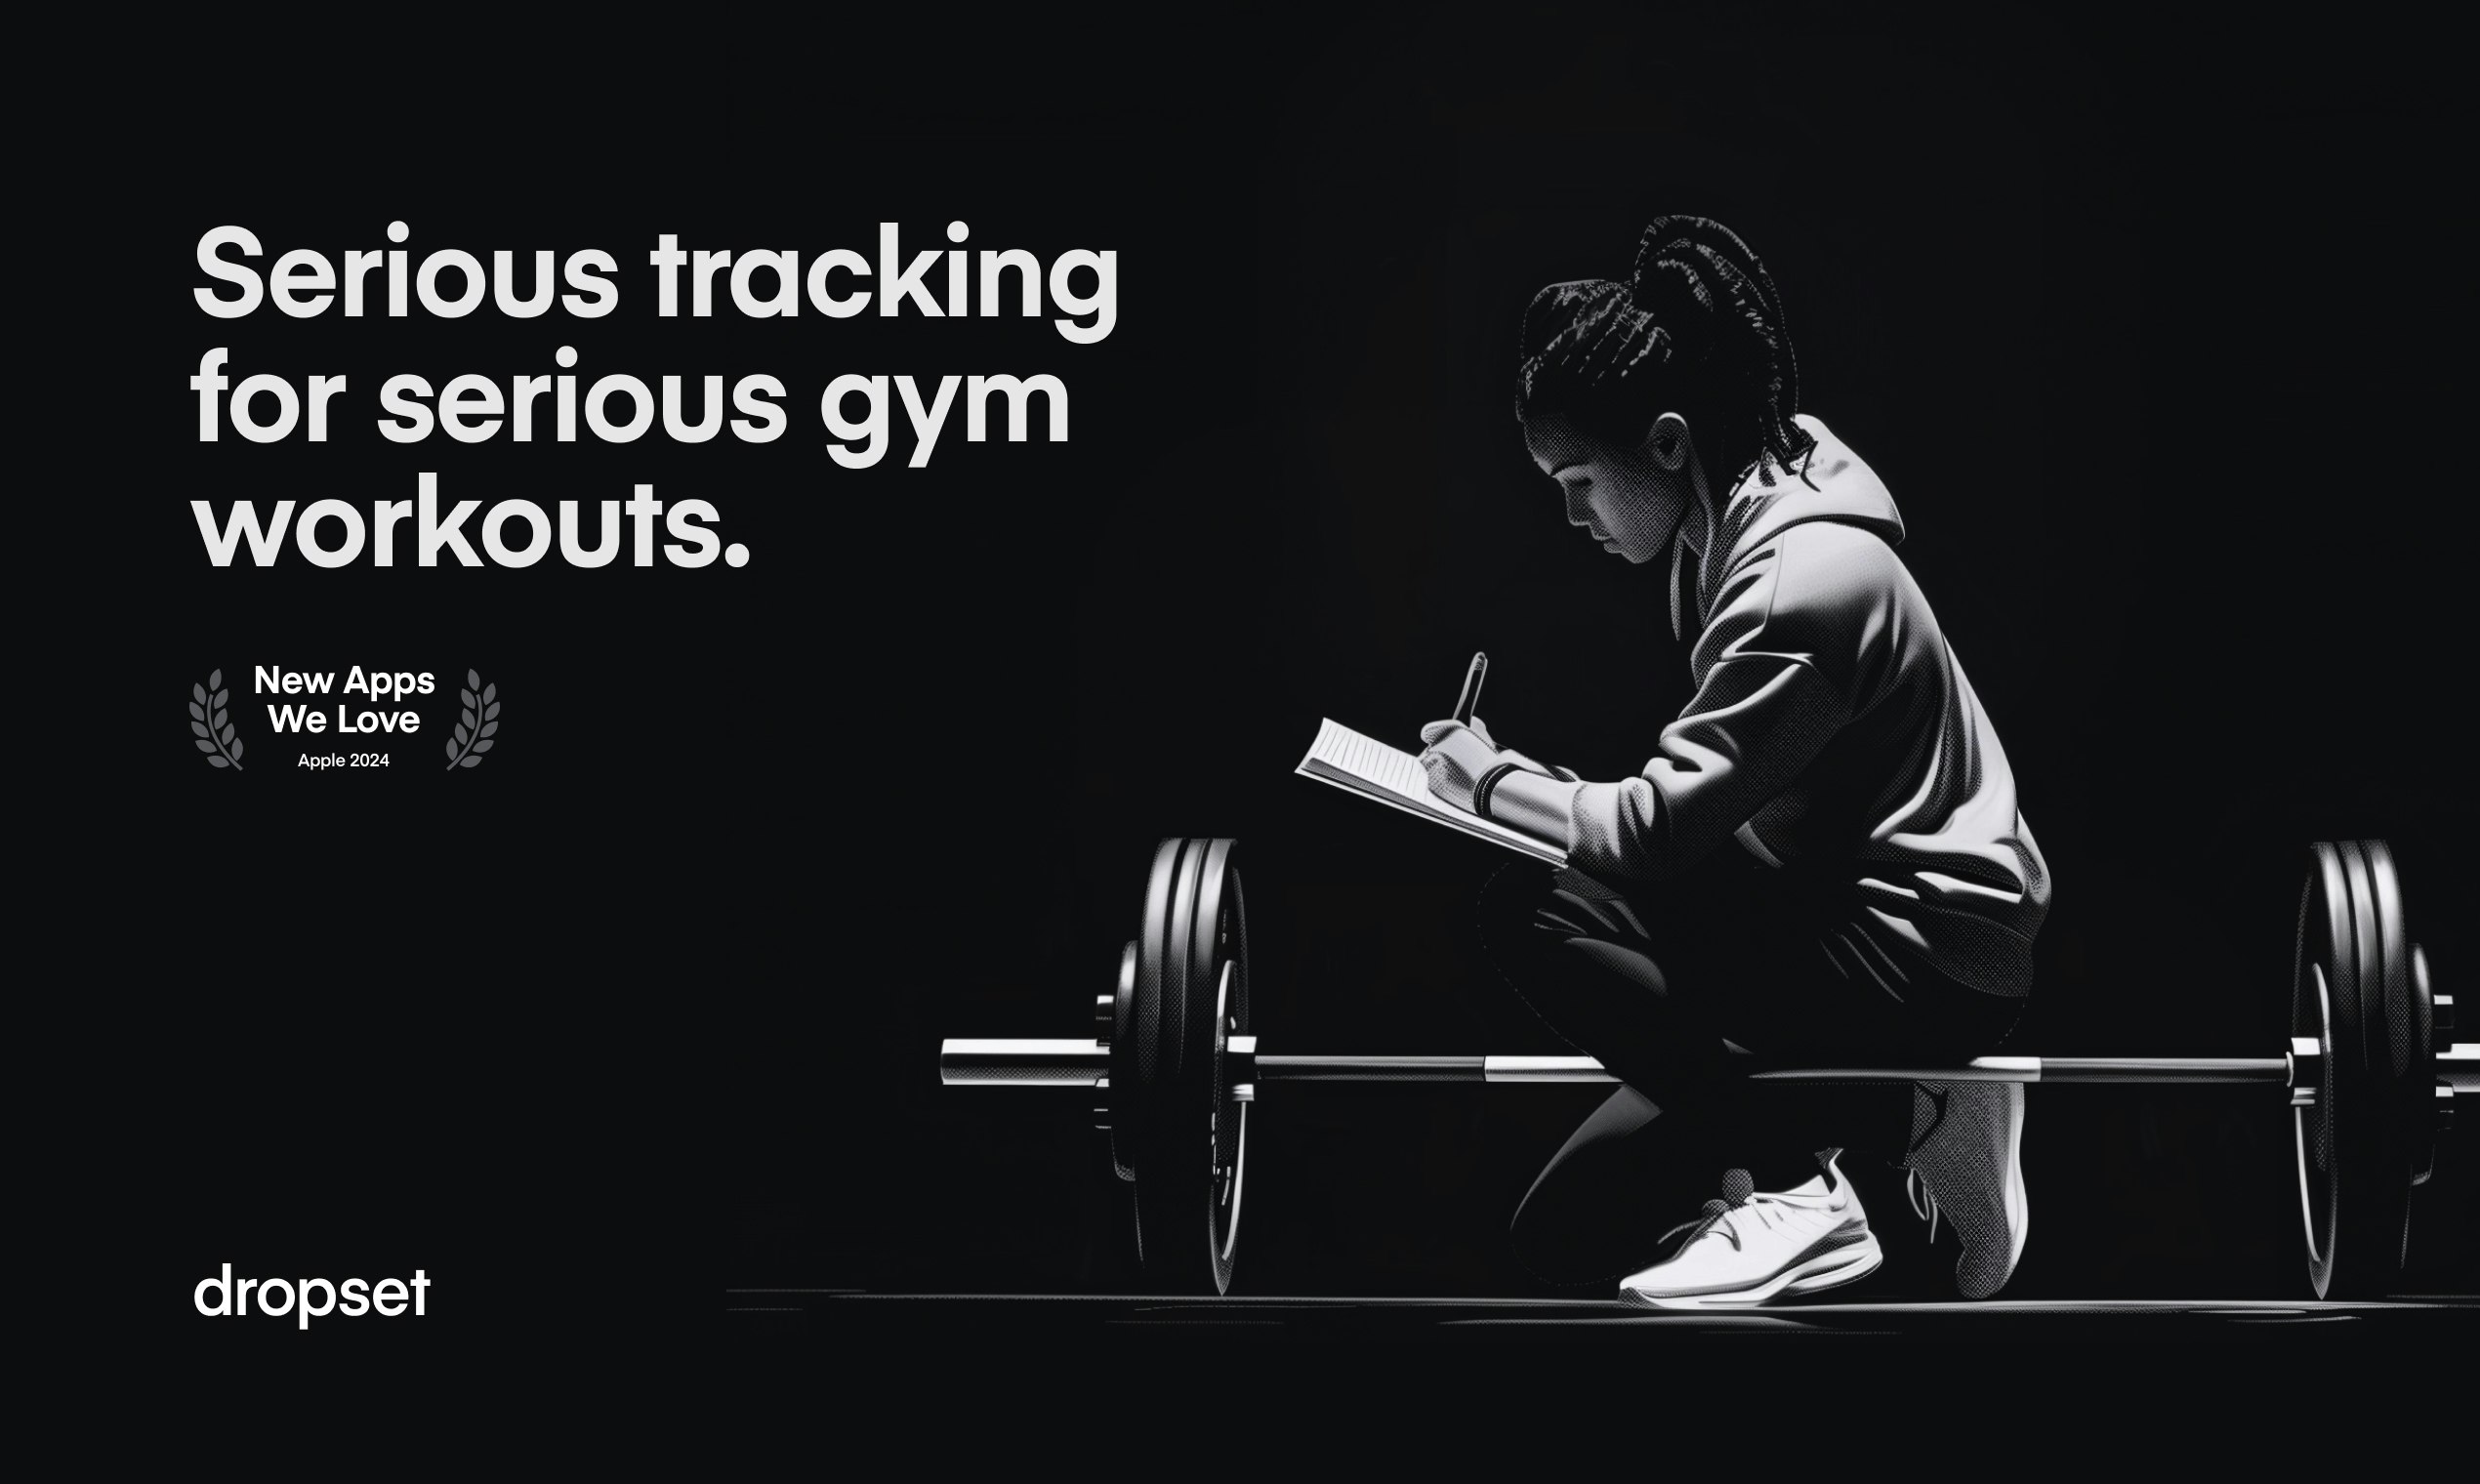 startuptile Dropset-Serious tracking for serious gym workouts